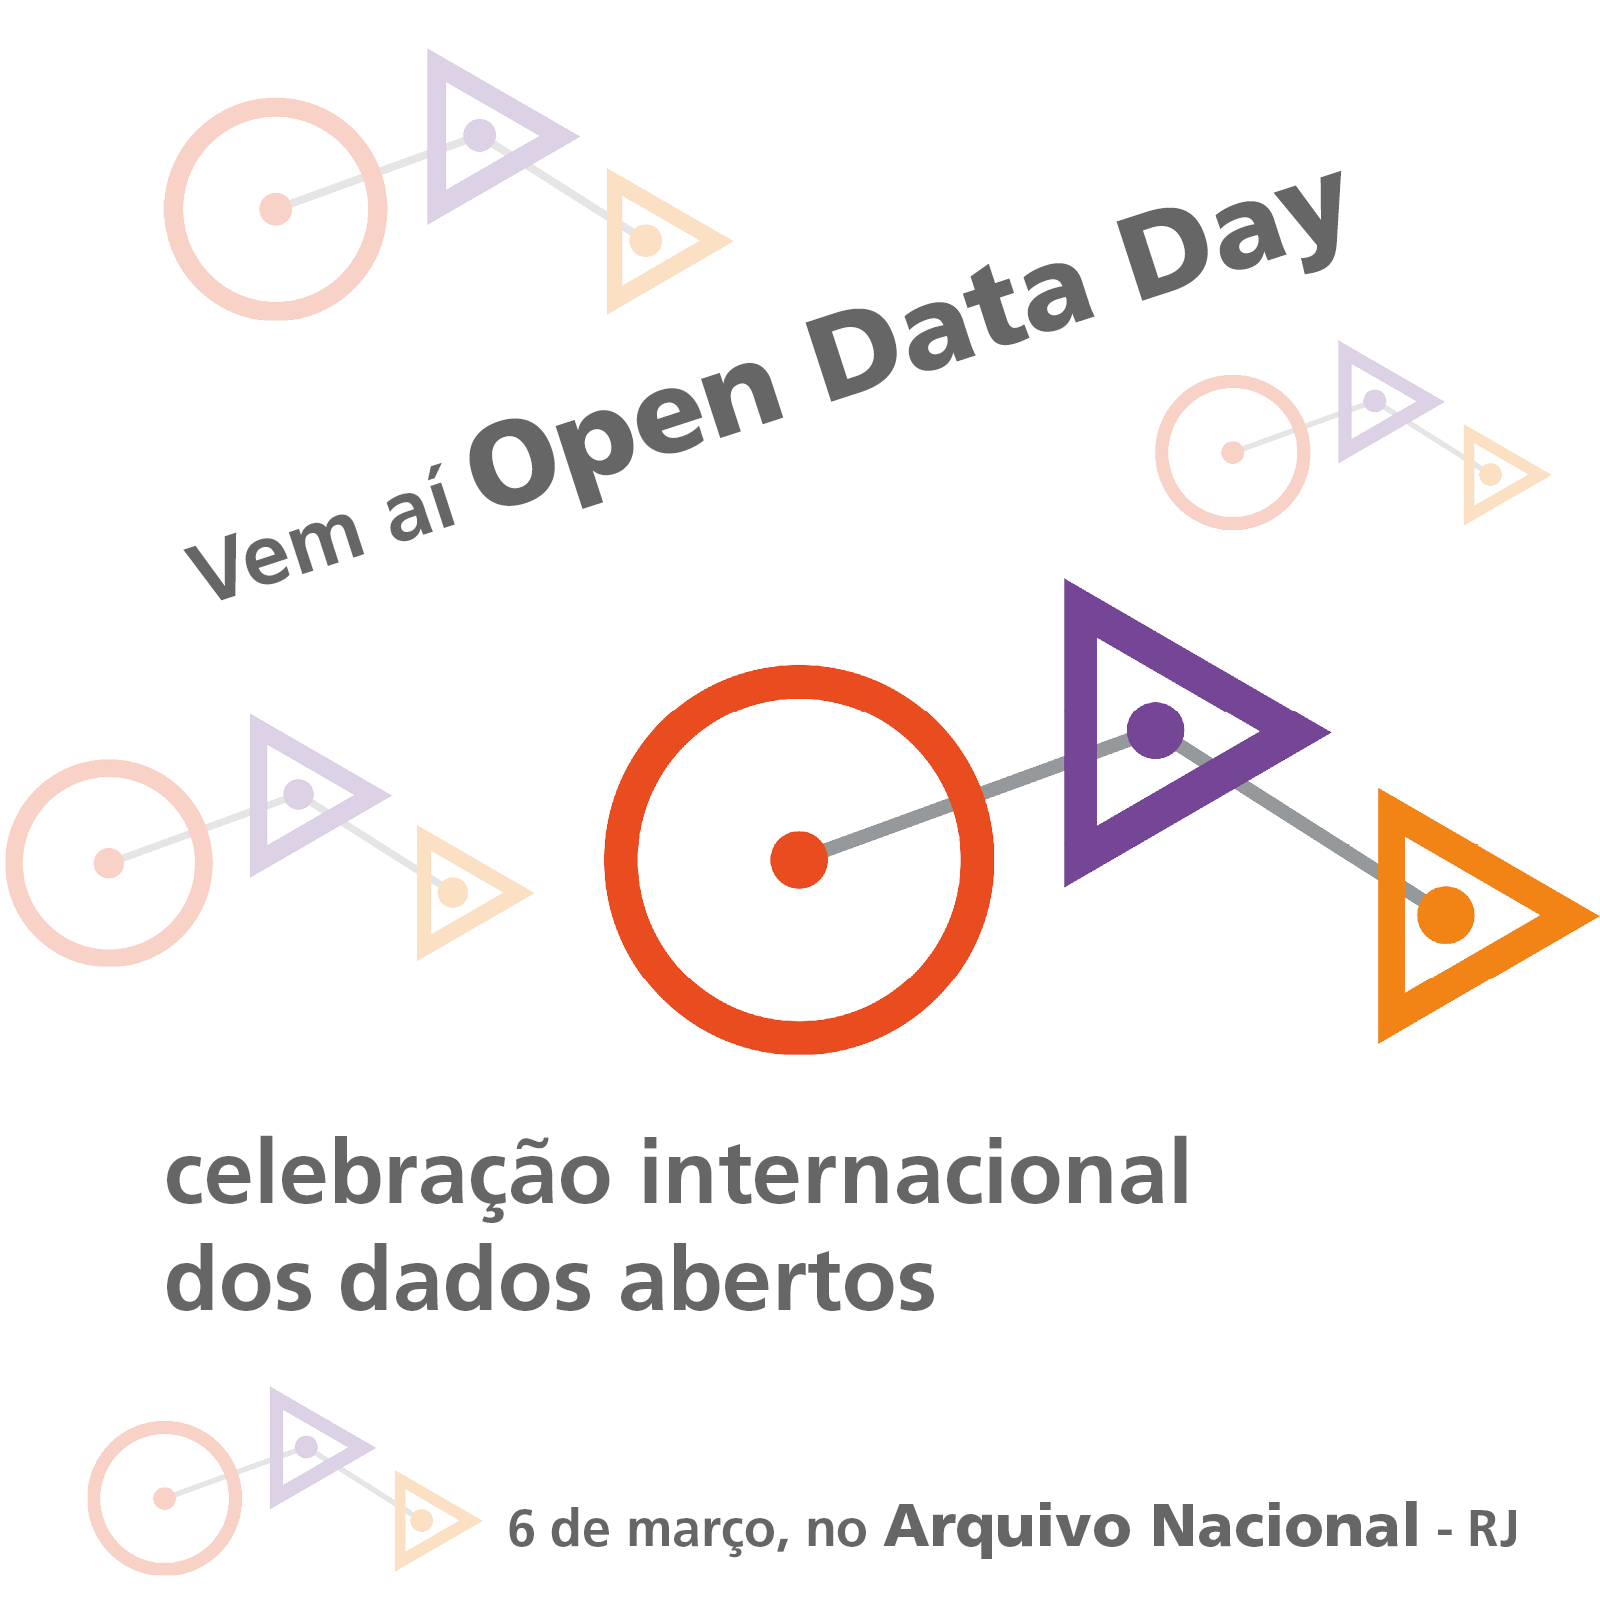 open_data_day_card_facebook_02.png